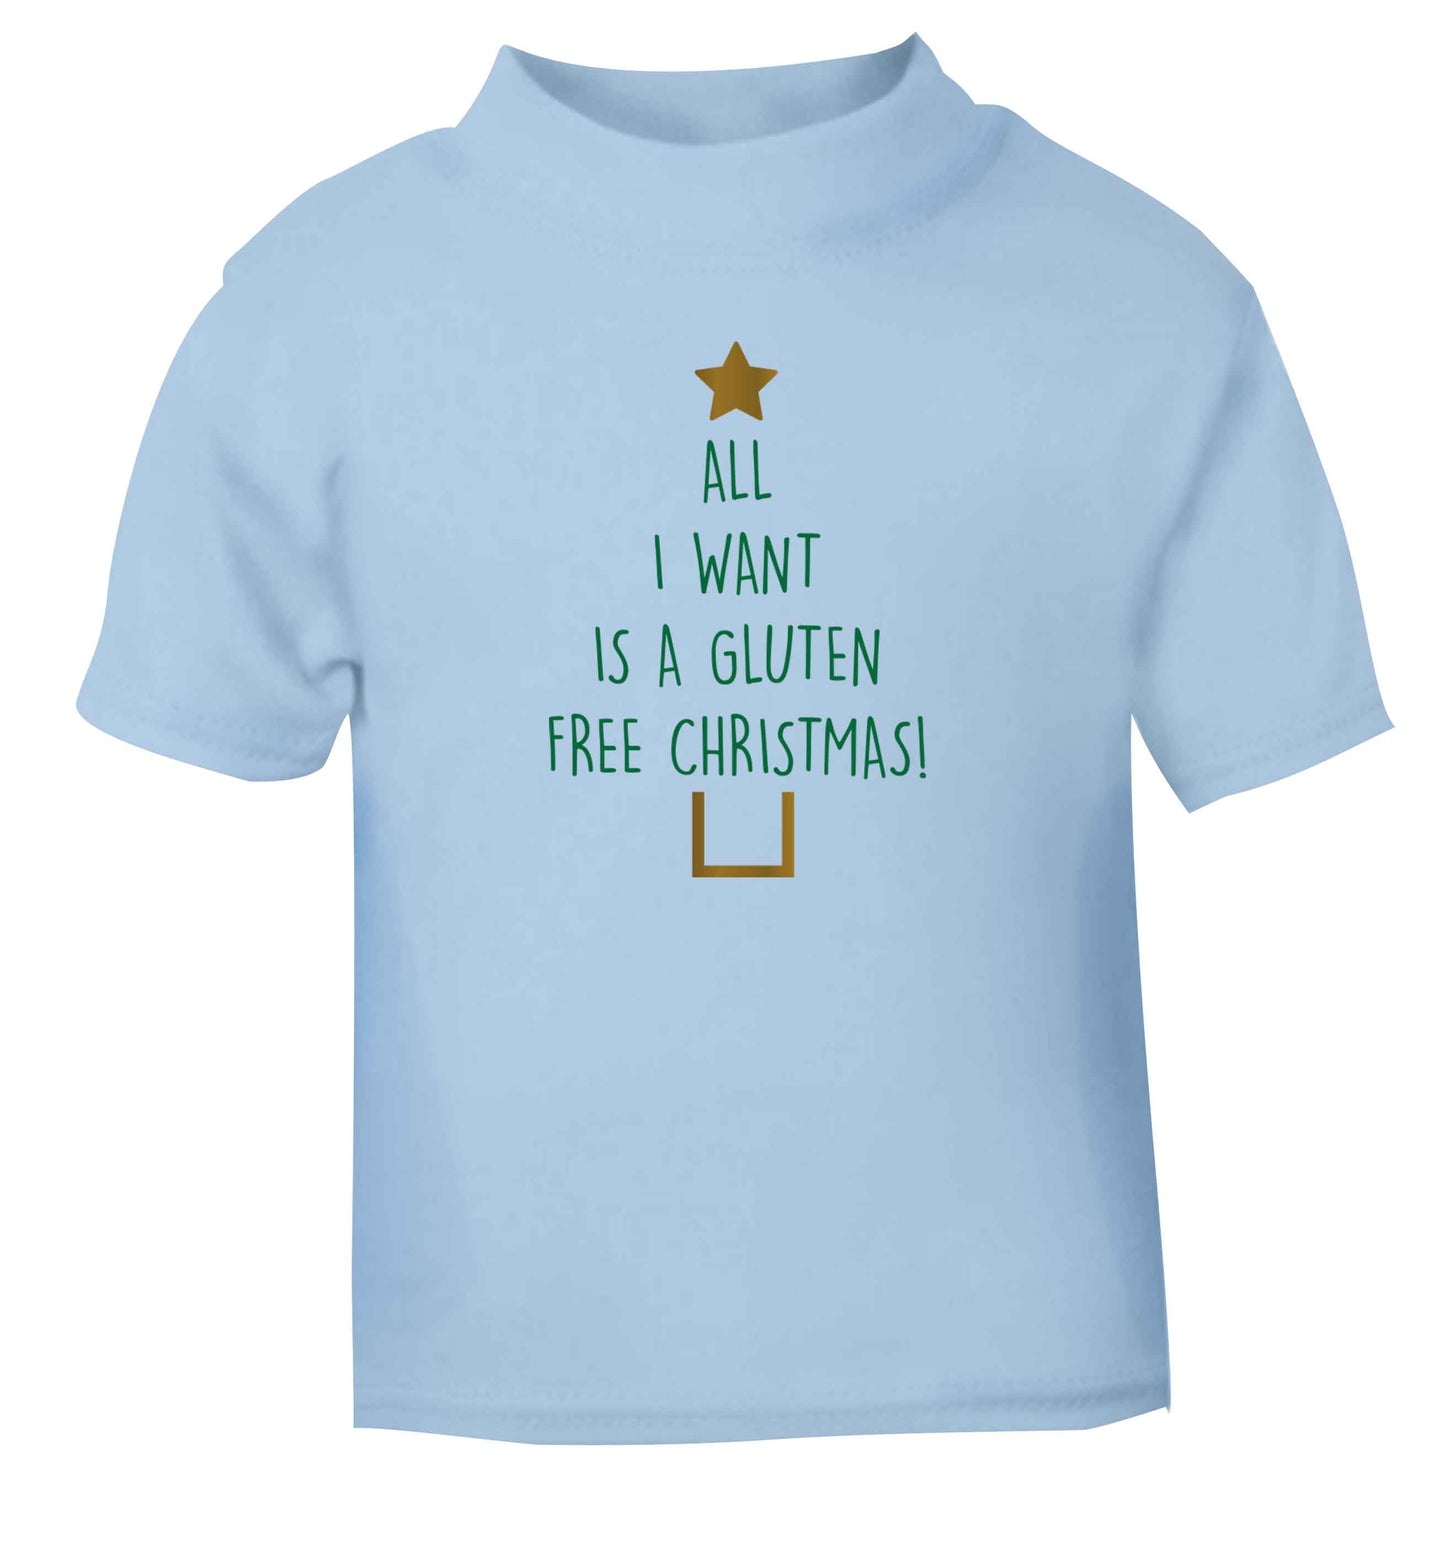 All I want is a gluten free Christmas light blue Baby Toddler Tshirt 2 Years